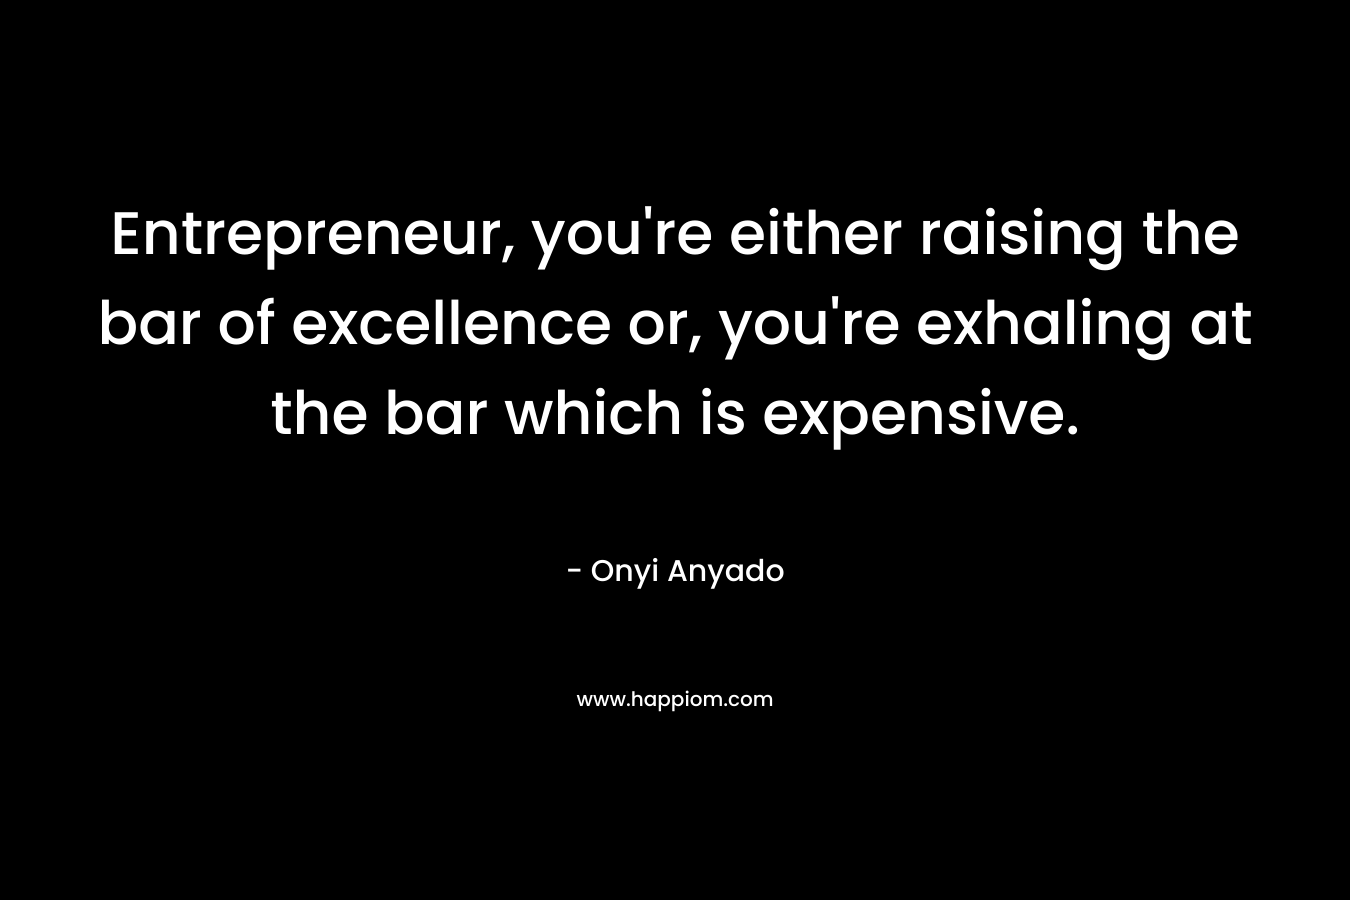 Entrepreneur, you’re either raising the bar of excellence or, you’re exhaling at the bar which is expensive. – Onyi Anyado